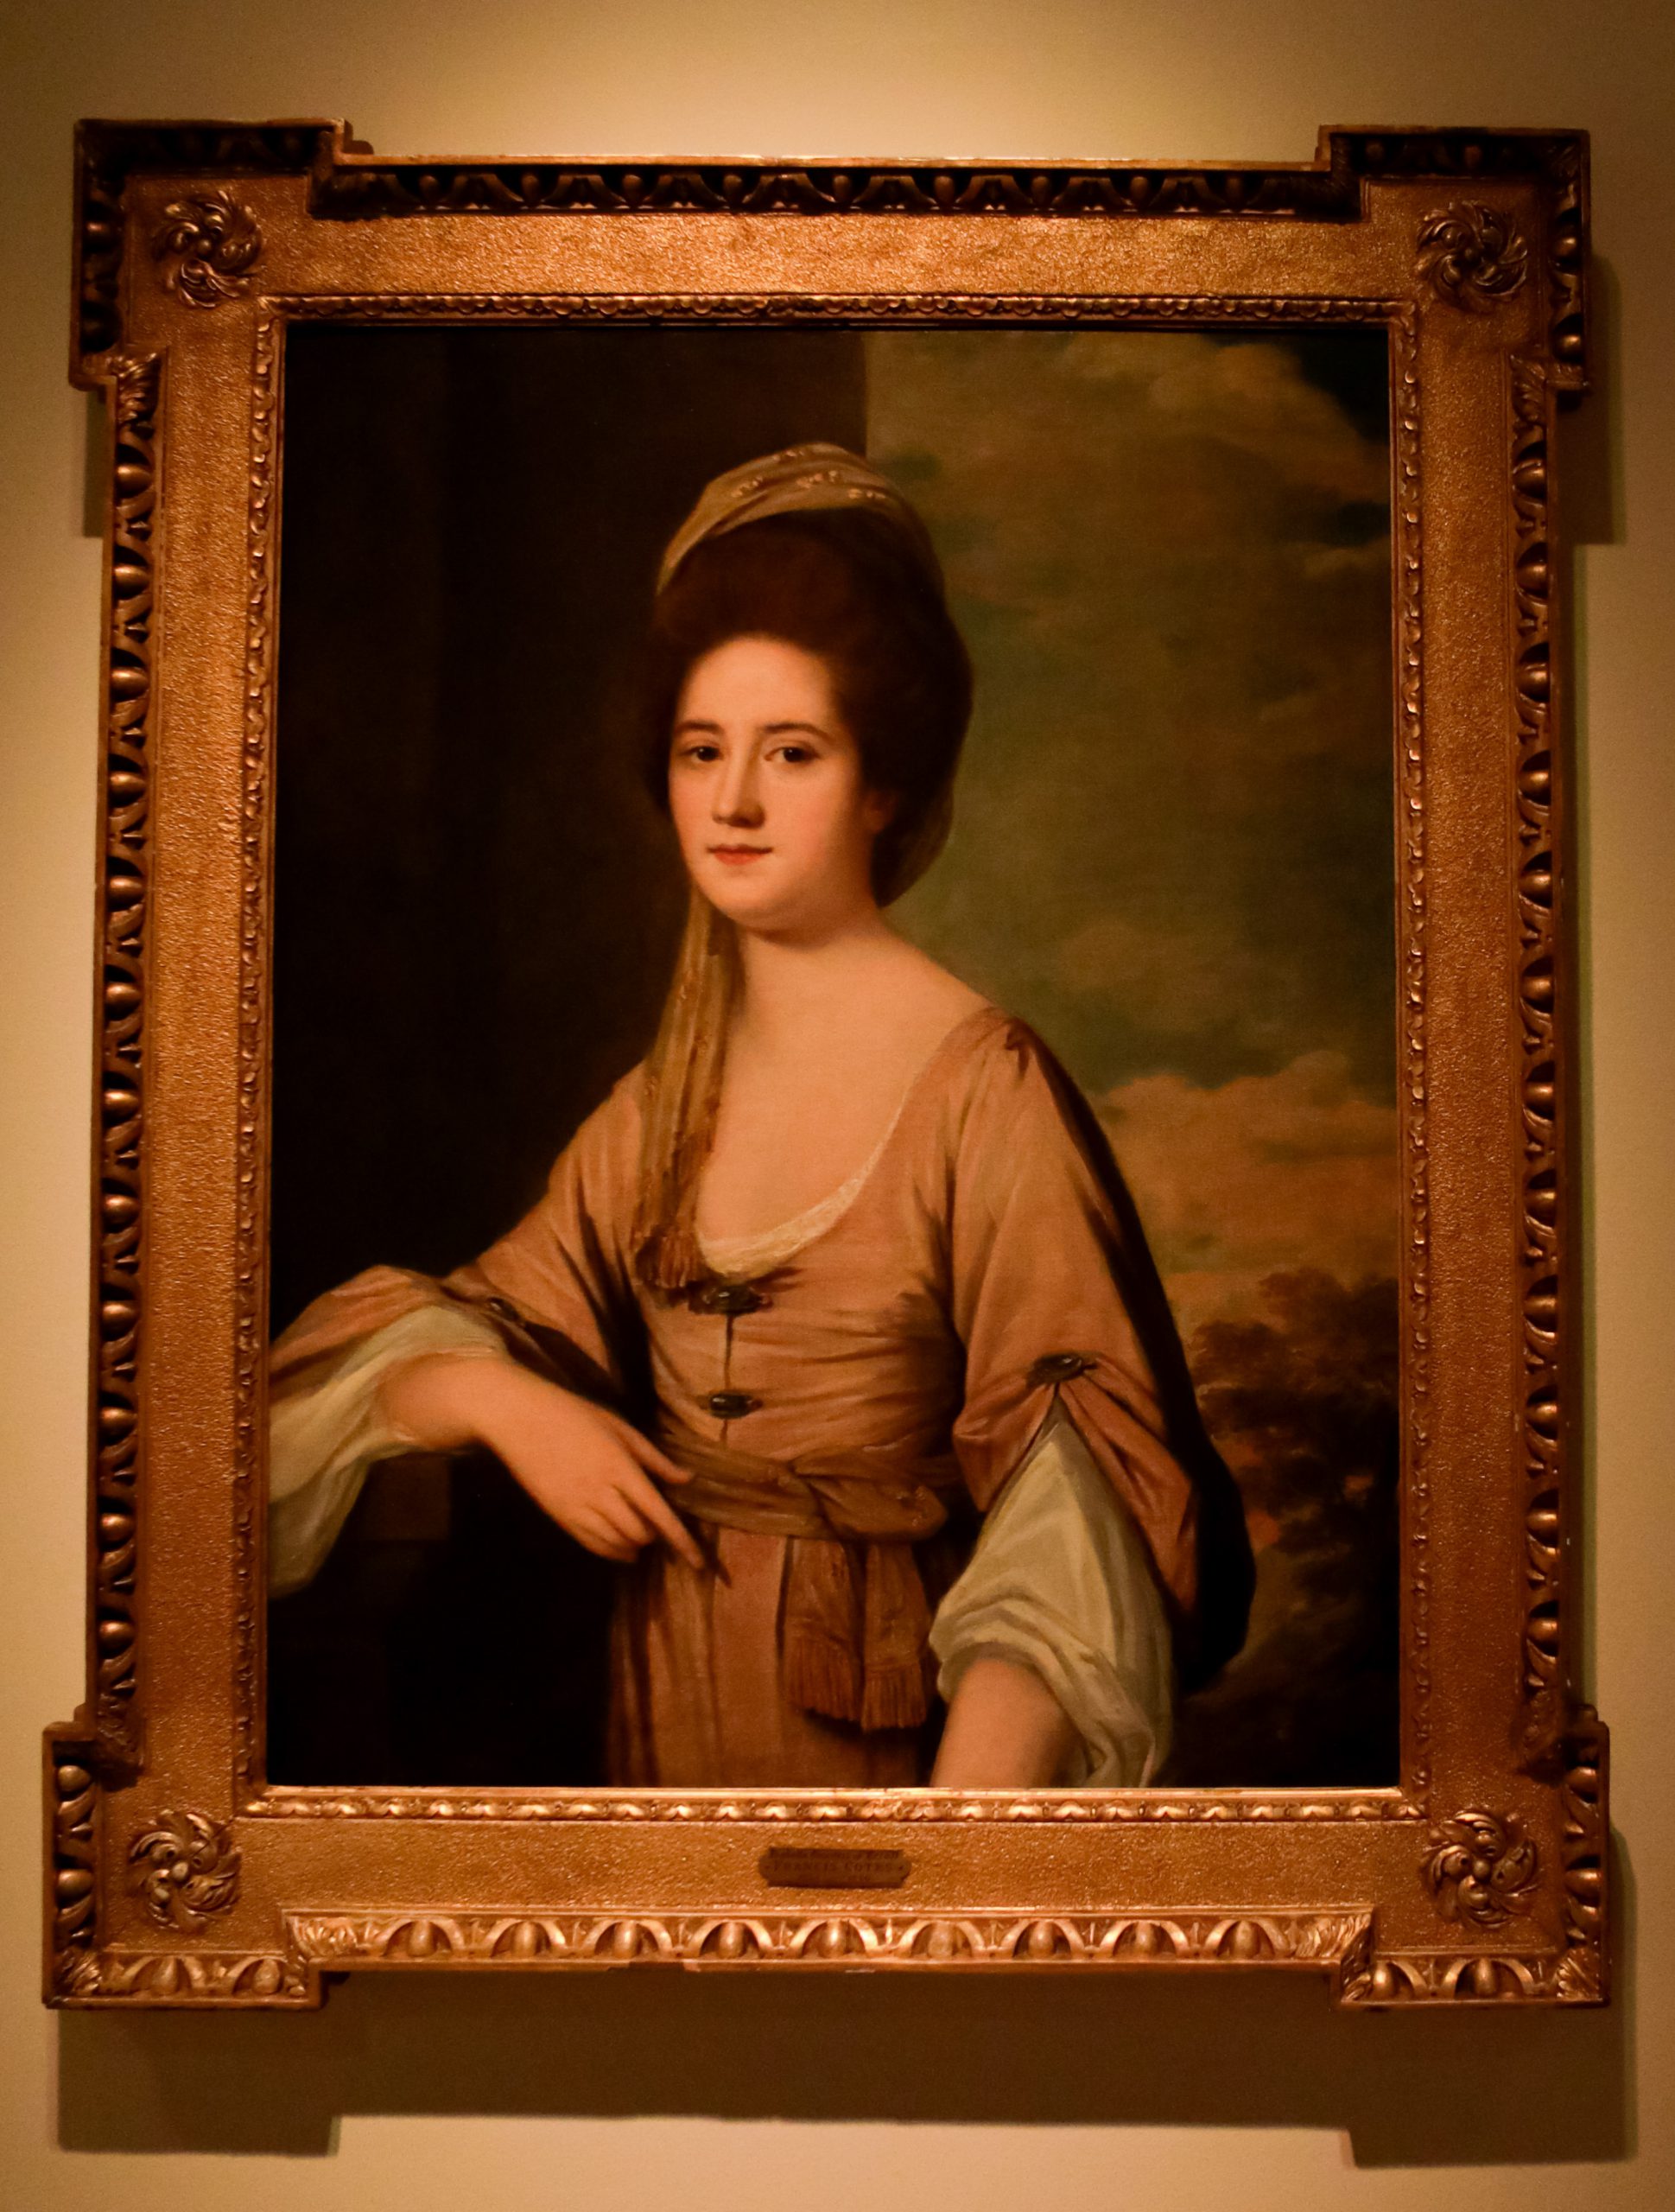 Oil painting of a woman of nobility in the 19th century. This image shows the painting as it would look under gas lighting.